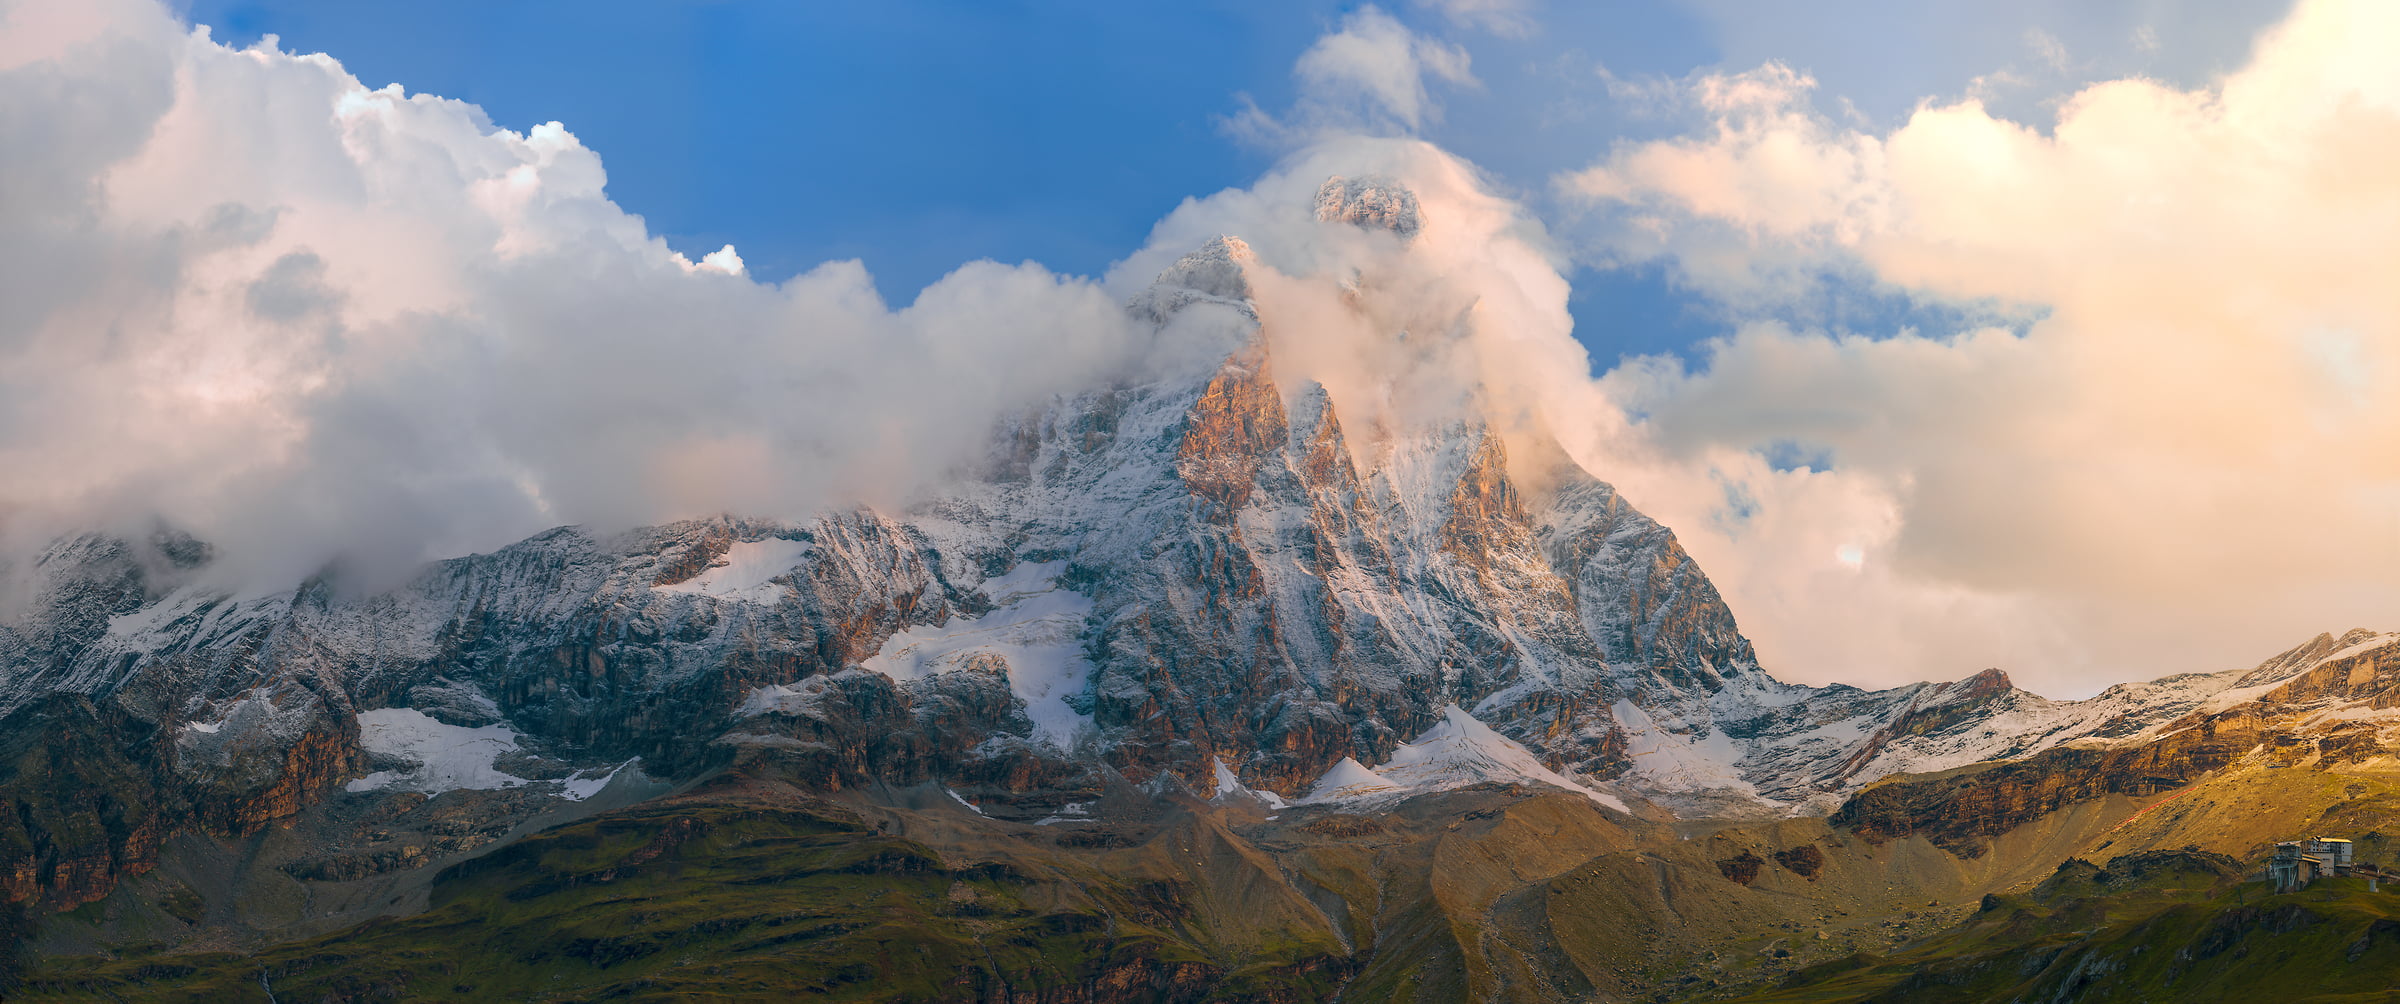 1,371 megapixels! A very high resolution, large-format VAST photo print of the Matterhorn mountain with clouds on the summit at sunset; landscape photograph created by Ennio Pozzetti in Breuil-Cervinia, Valle d'Aosta, Italy.